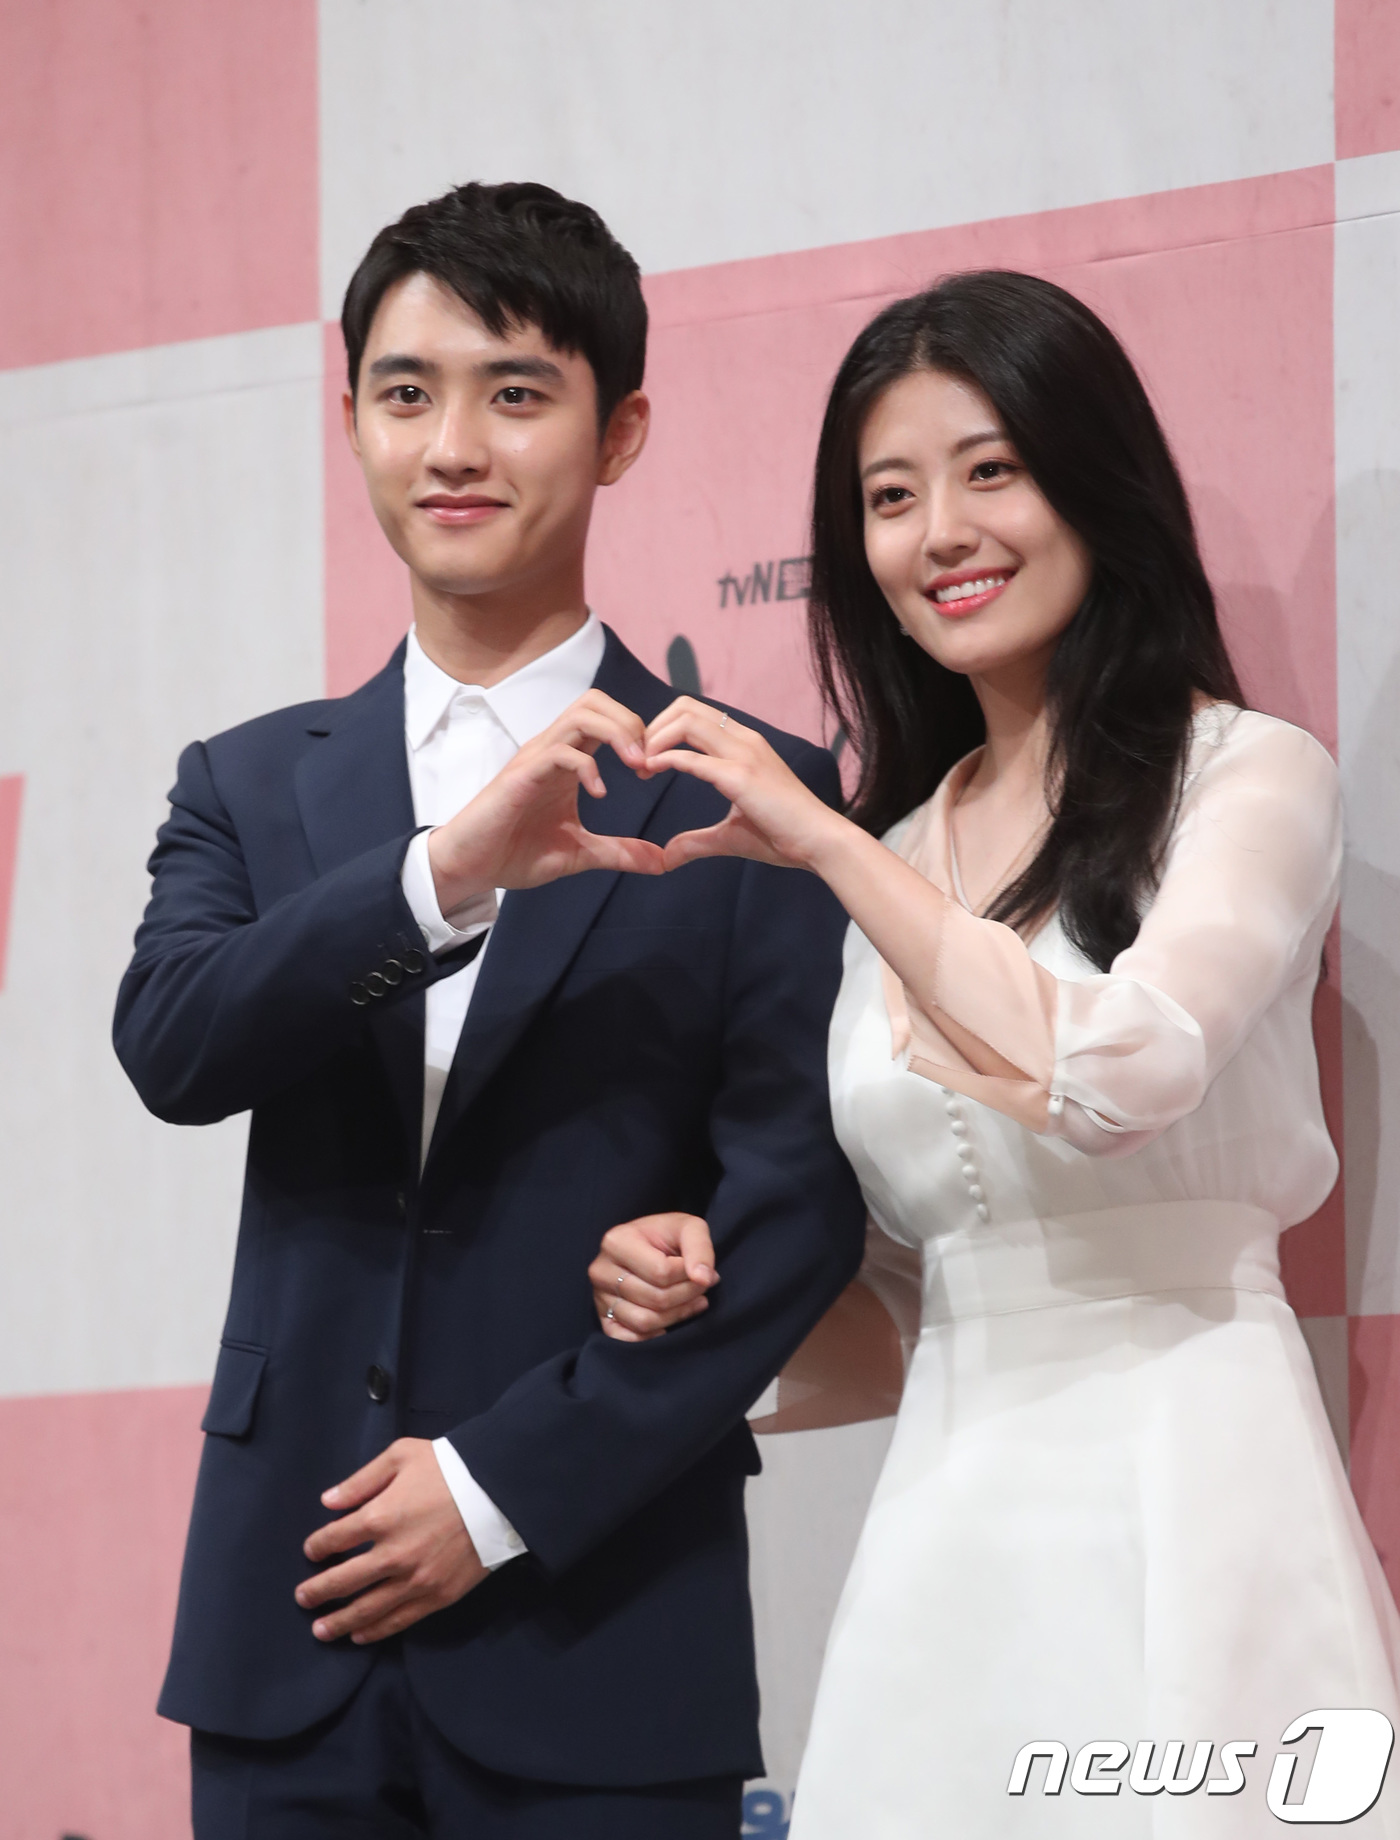 Seoul=) = Actors D.O. and Nam Ji-hyun (right) pose at the production presentation of TVNs new monthly drama One Hundred Days of the Day at Imperial Palace Seoul in Nonhyeon-dong, Gangnam-gu, Seoul on the 4th.The Hundred Days of the Hundred Days is the unheard of 100 Days of Wondeuk (D.O.) and the oldest daughter of the Joseon Dynasty, Hong Shim (Nam Ji-hyun), who fell from the interest rate of the completely unmarried crown prince to the hopeless.This is a work drawn in the background of the fictional Joseon Dynasty as a romance historical drama.